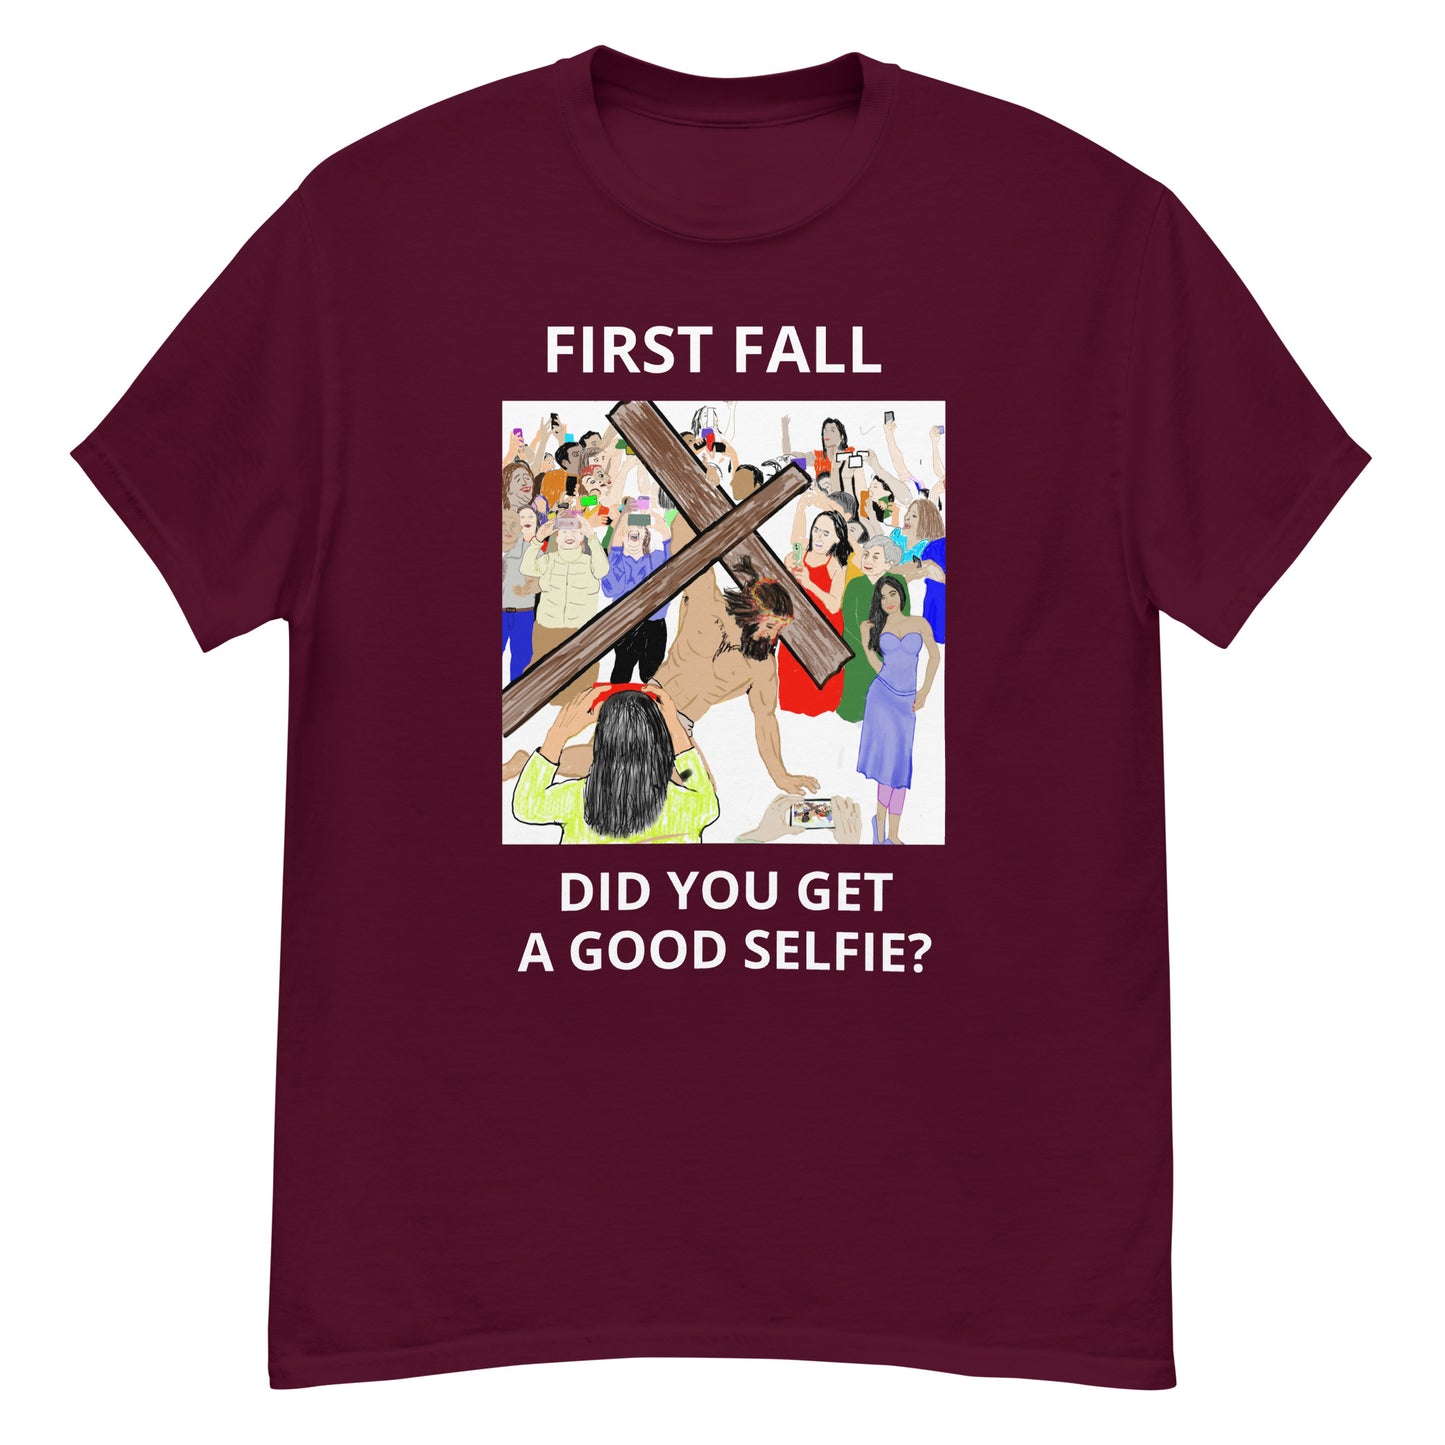 FIRST FALL Men's classic tee